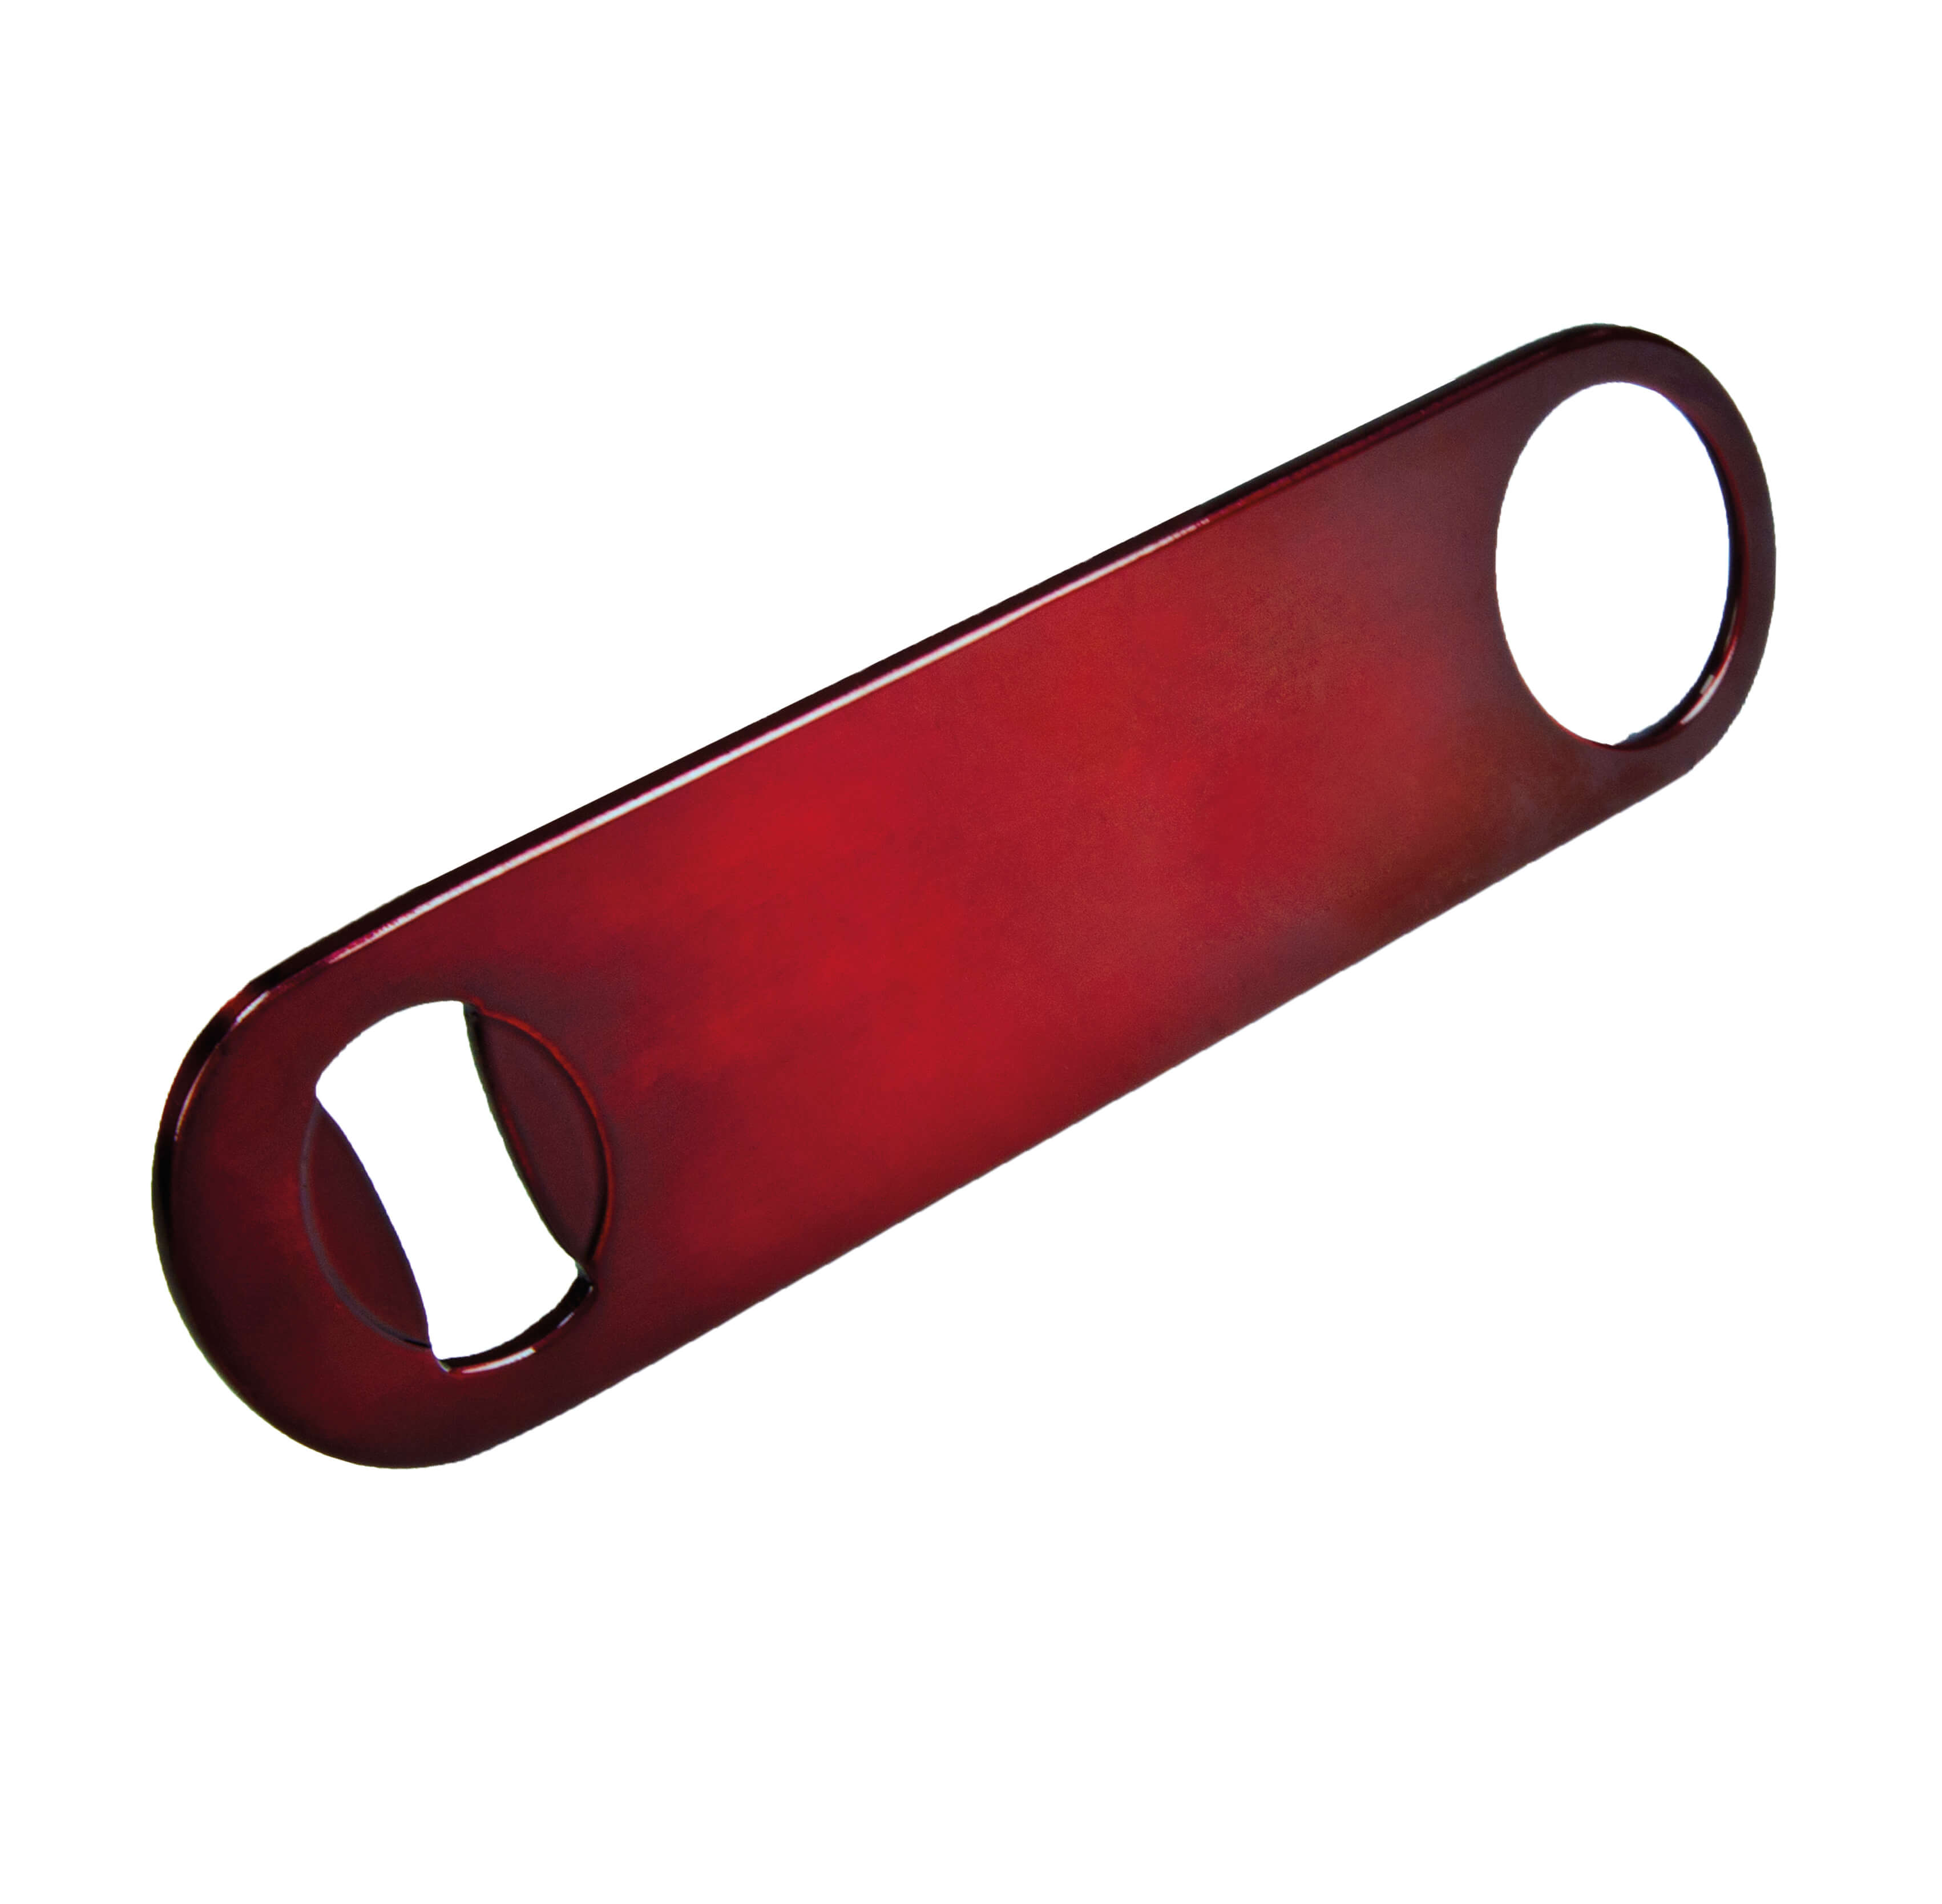 Cap lifter - speed opener, candy red